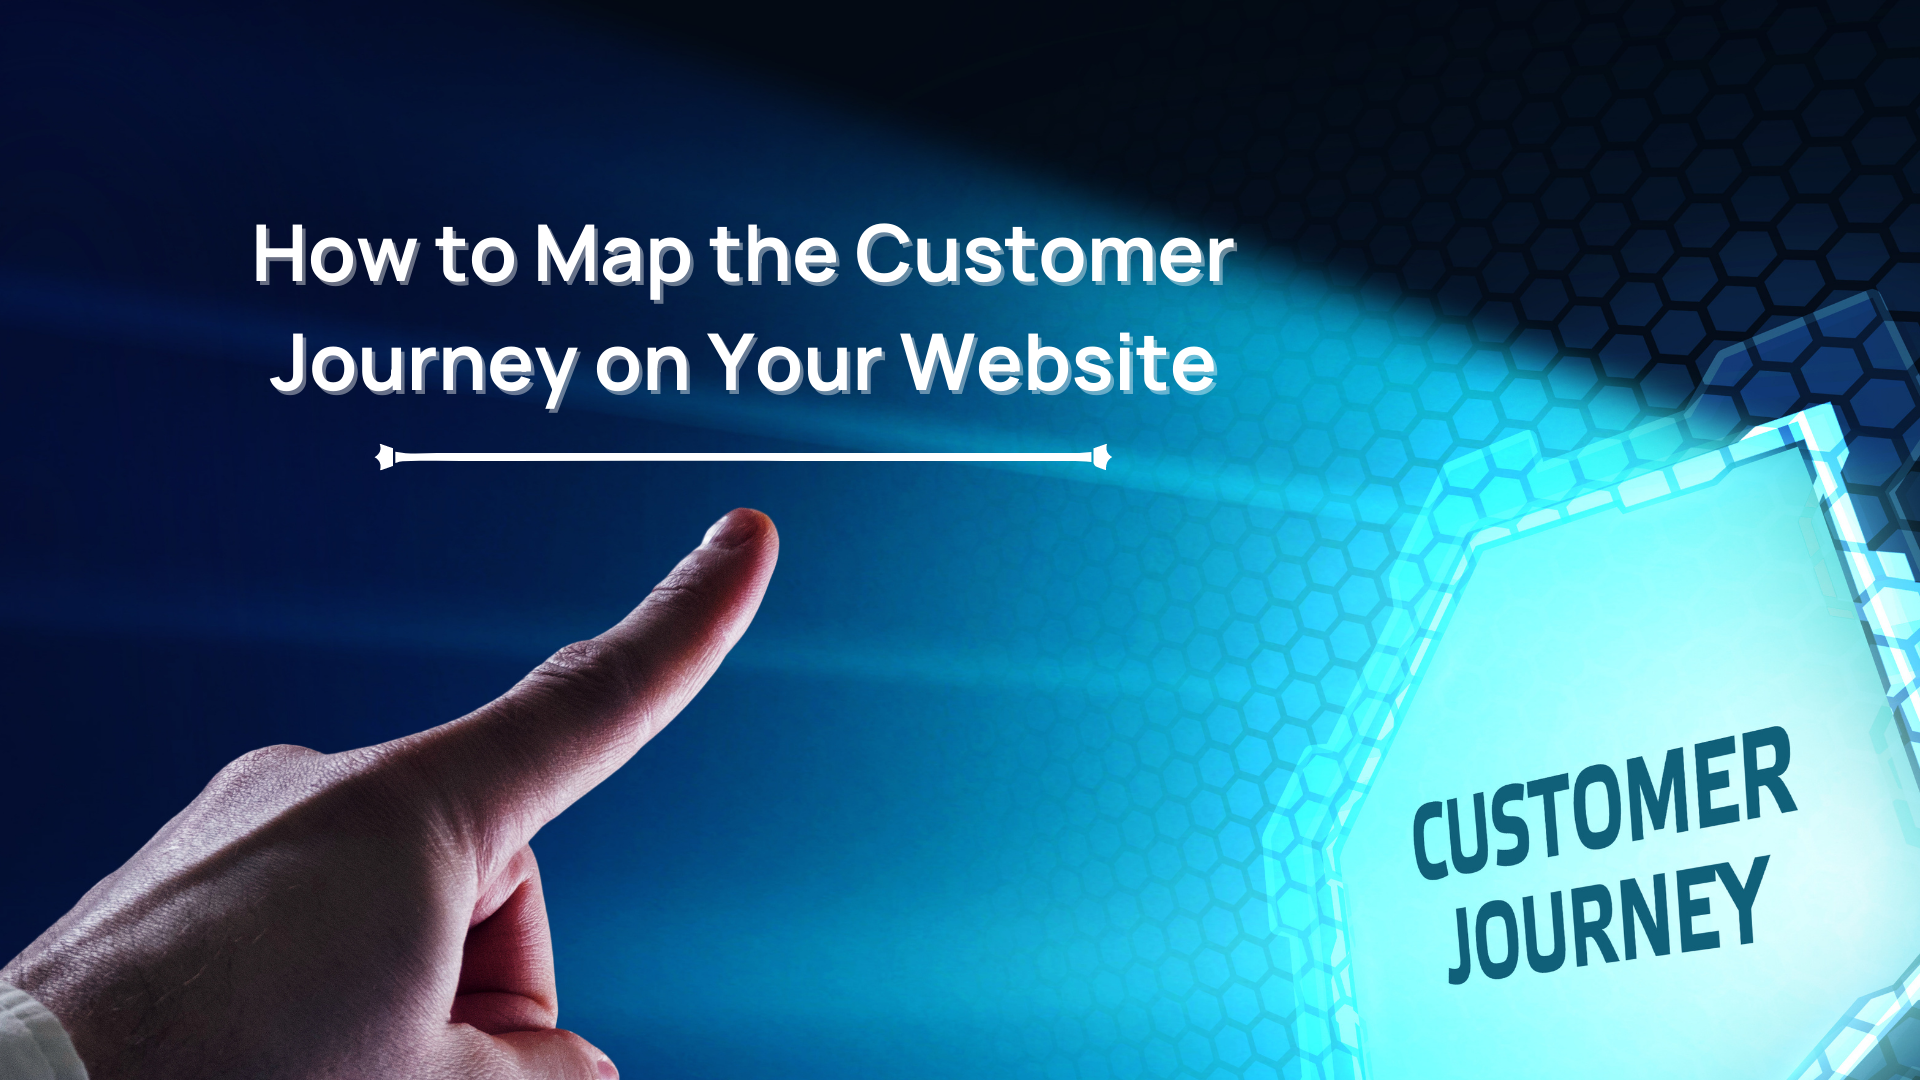 How to Map the Customer Journey on Your Website?